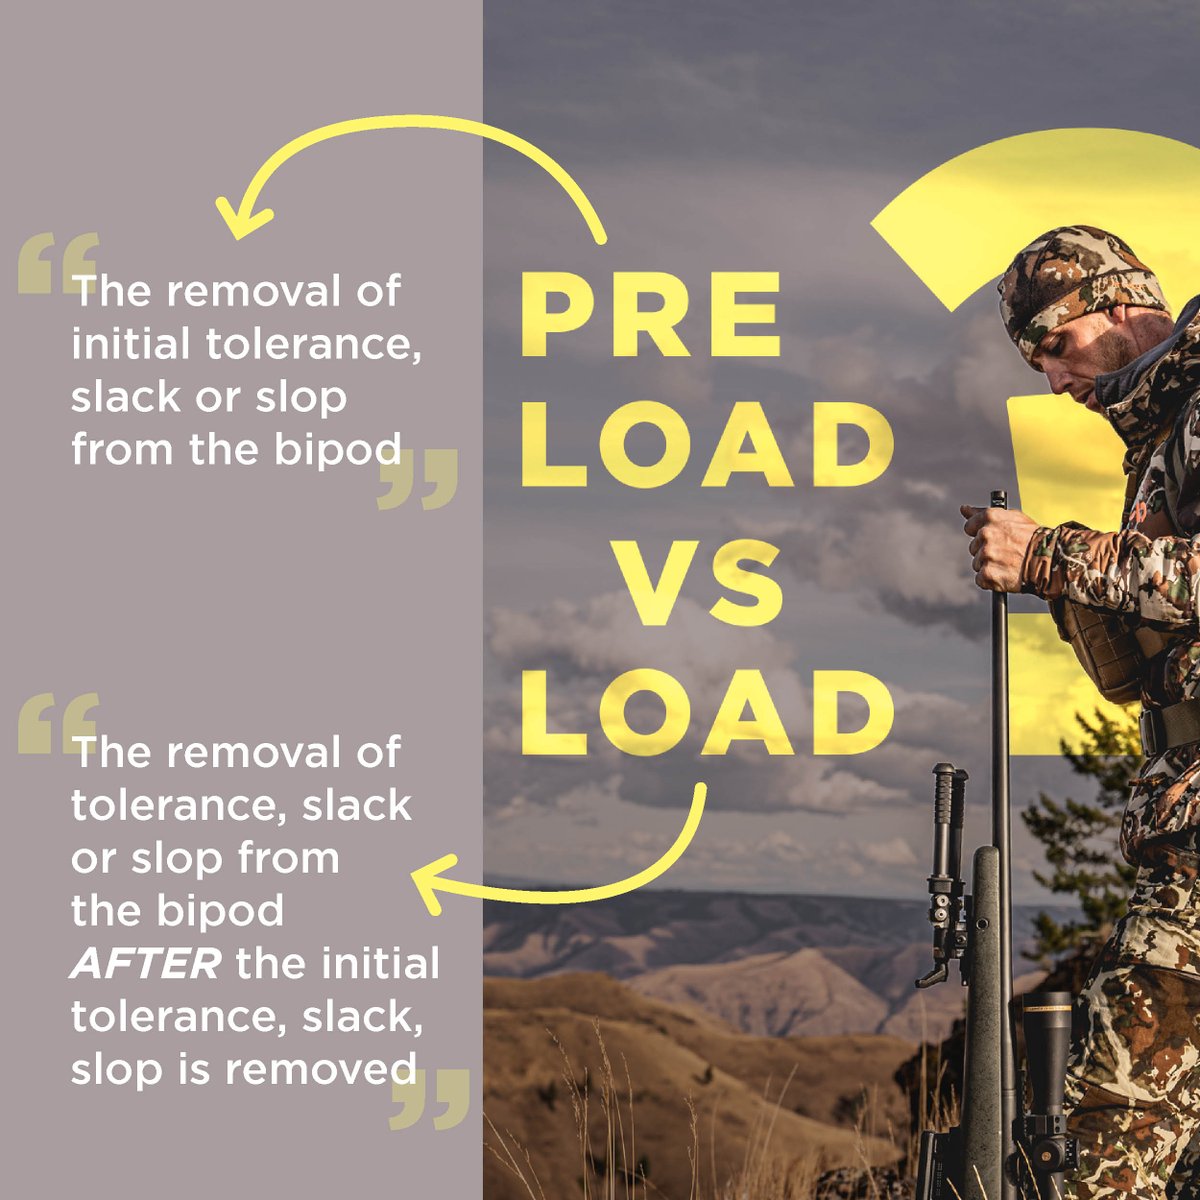 These definitions are true for all bipods regardless of brand. But for #ATLASBIPODS❓

The PSR and CAL series have less tolerance (aka slack/slop) than the V8 series as they both allow for loading.

But the PSR and CAL don't need to be pre-loaded as much as the V8 before loading.